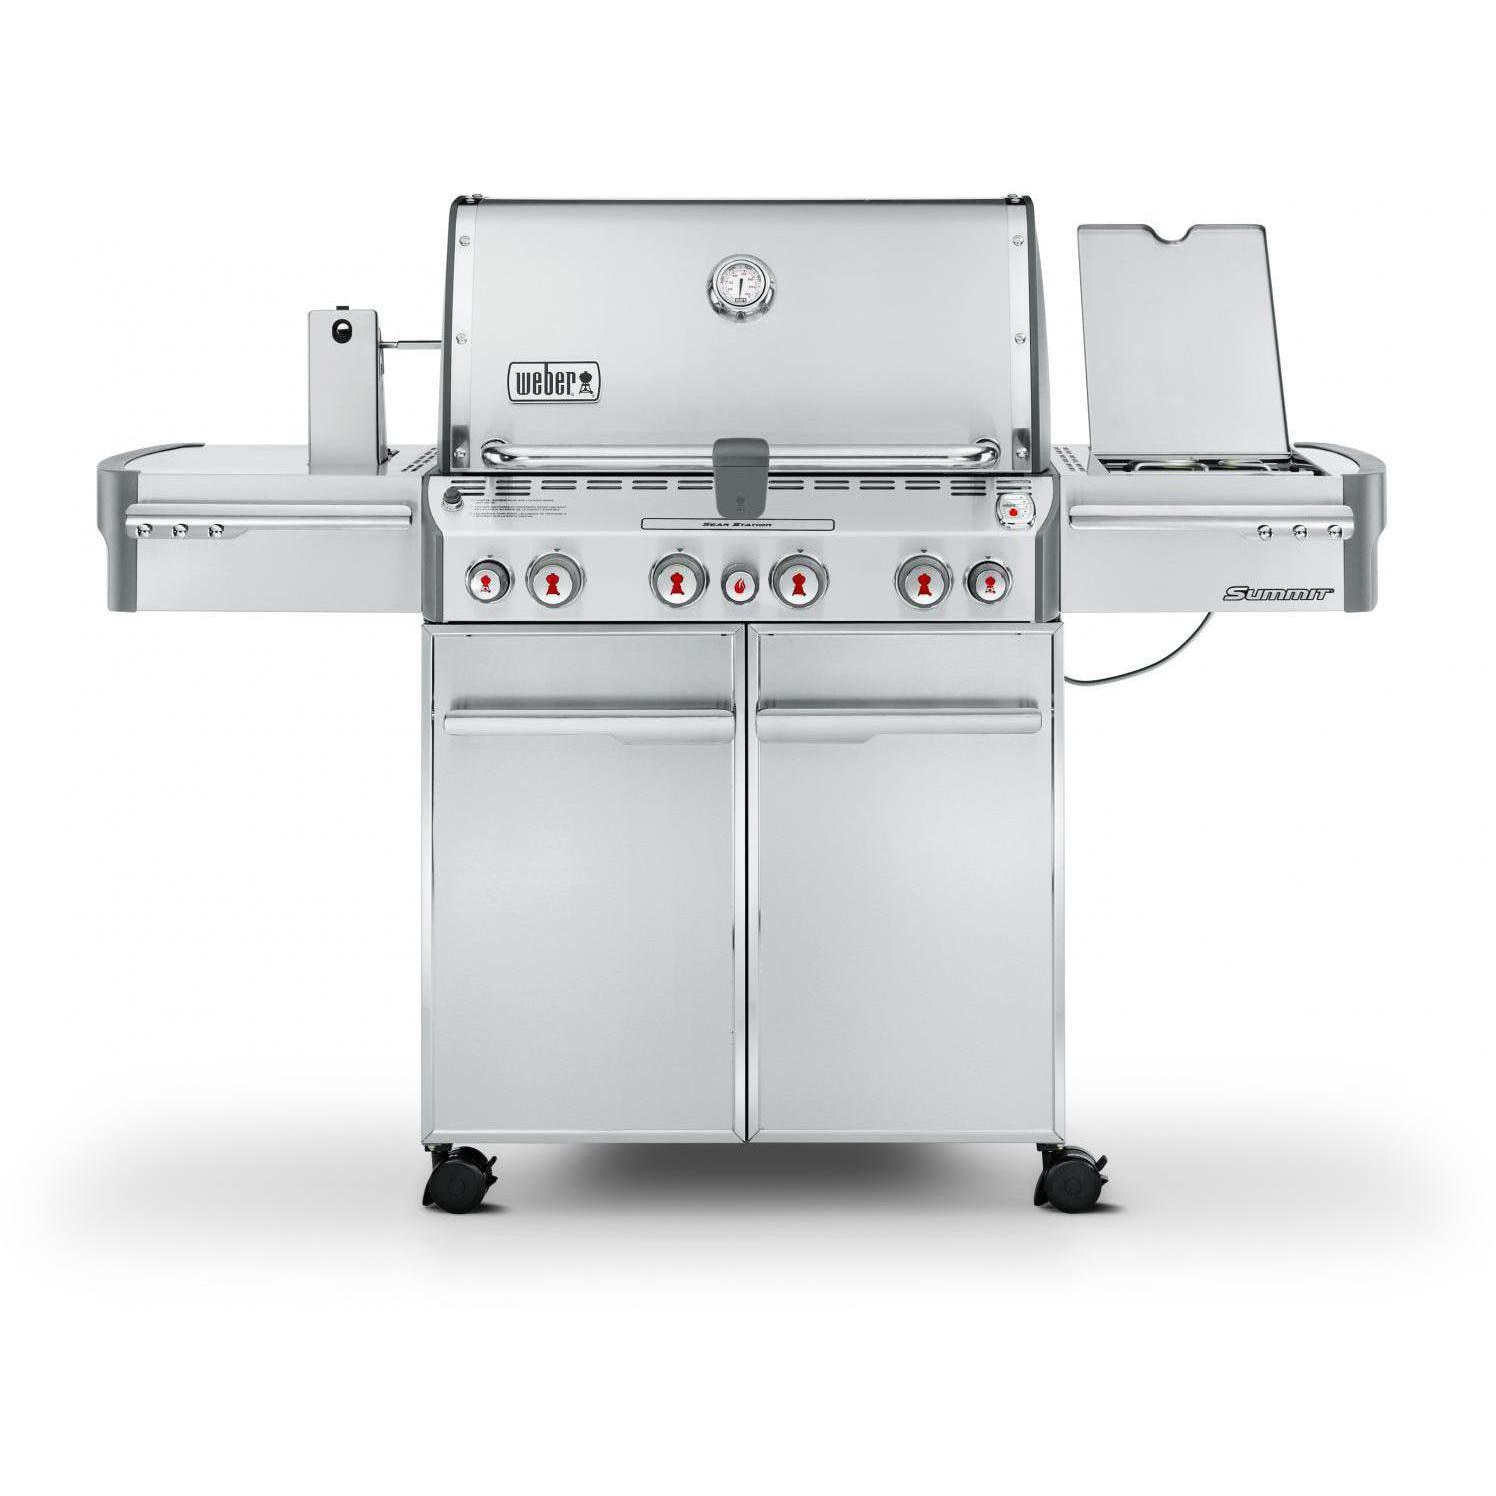 Summit S-470 Propane Stainless Steel - image 1 of 6